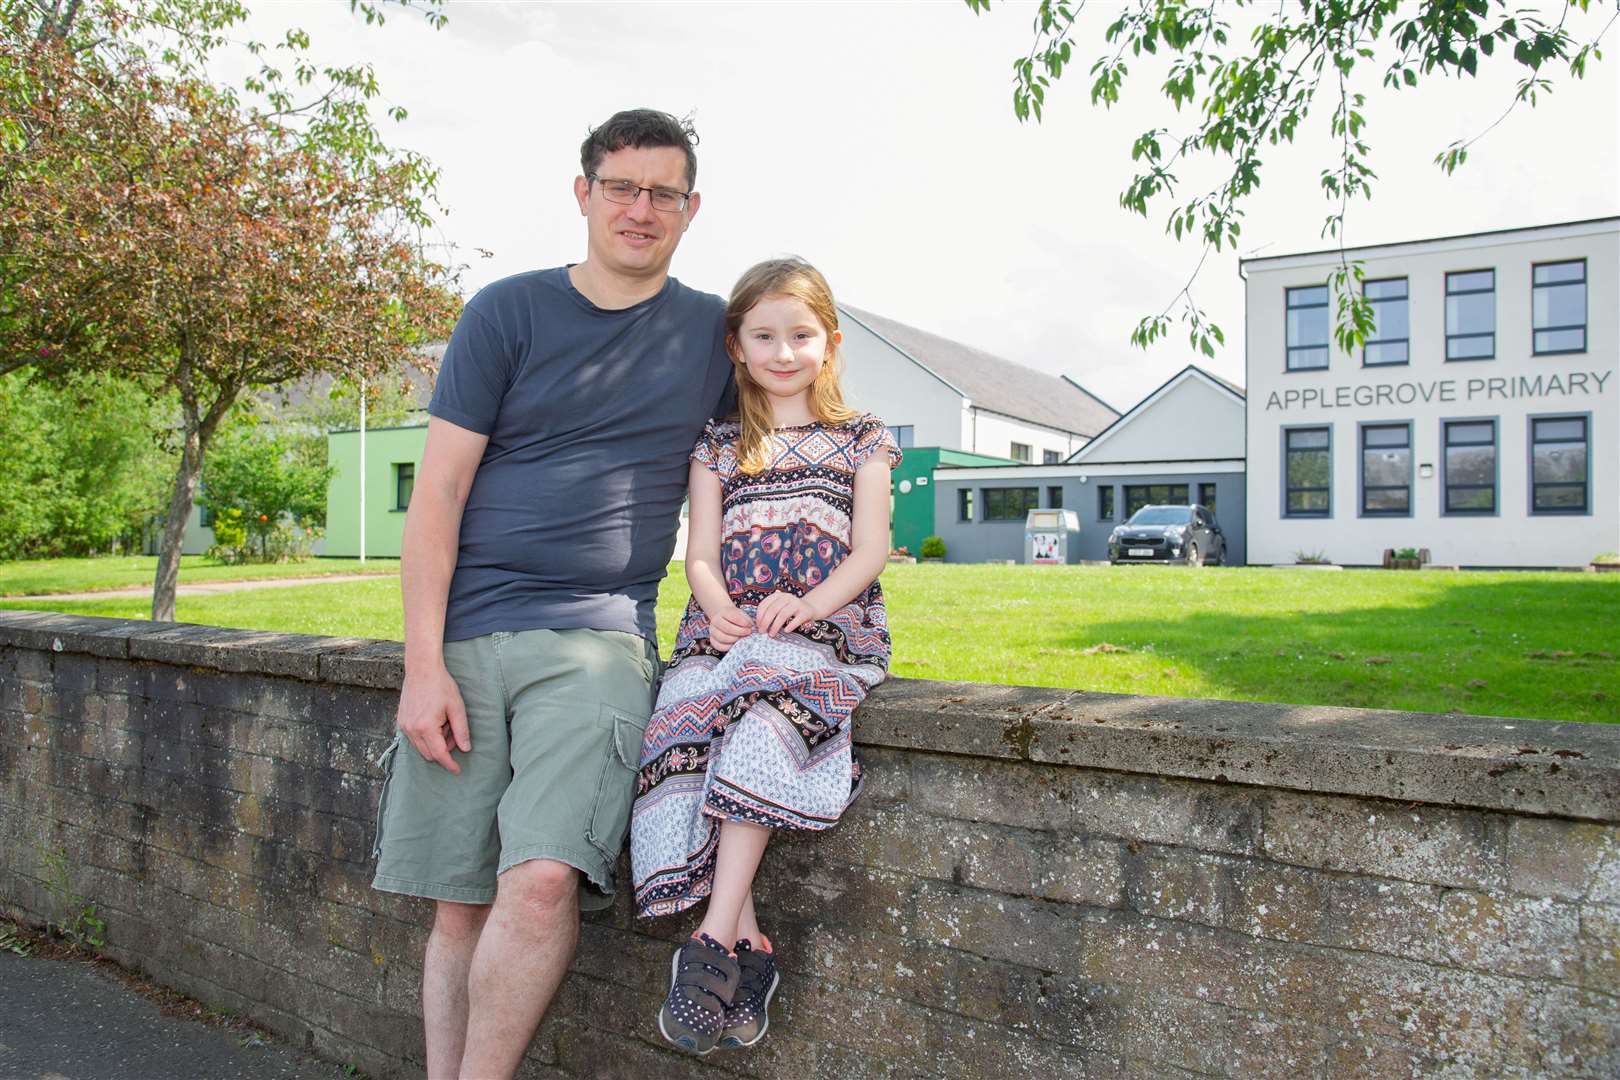 Forres Councillor Aaron Mclean with his daughter at her school - Applegrove Primary. Picture: Daniel Forsyth..